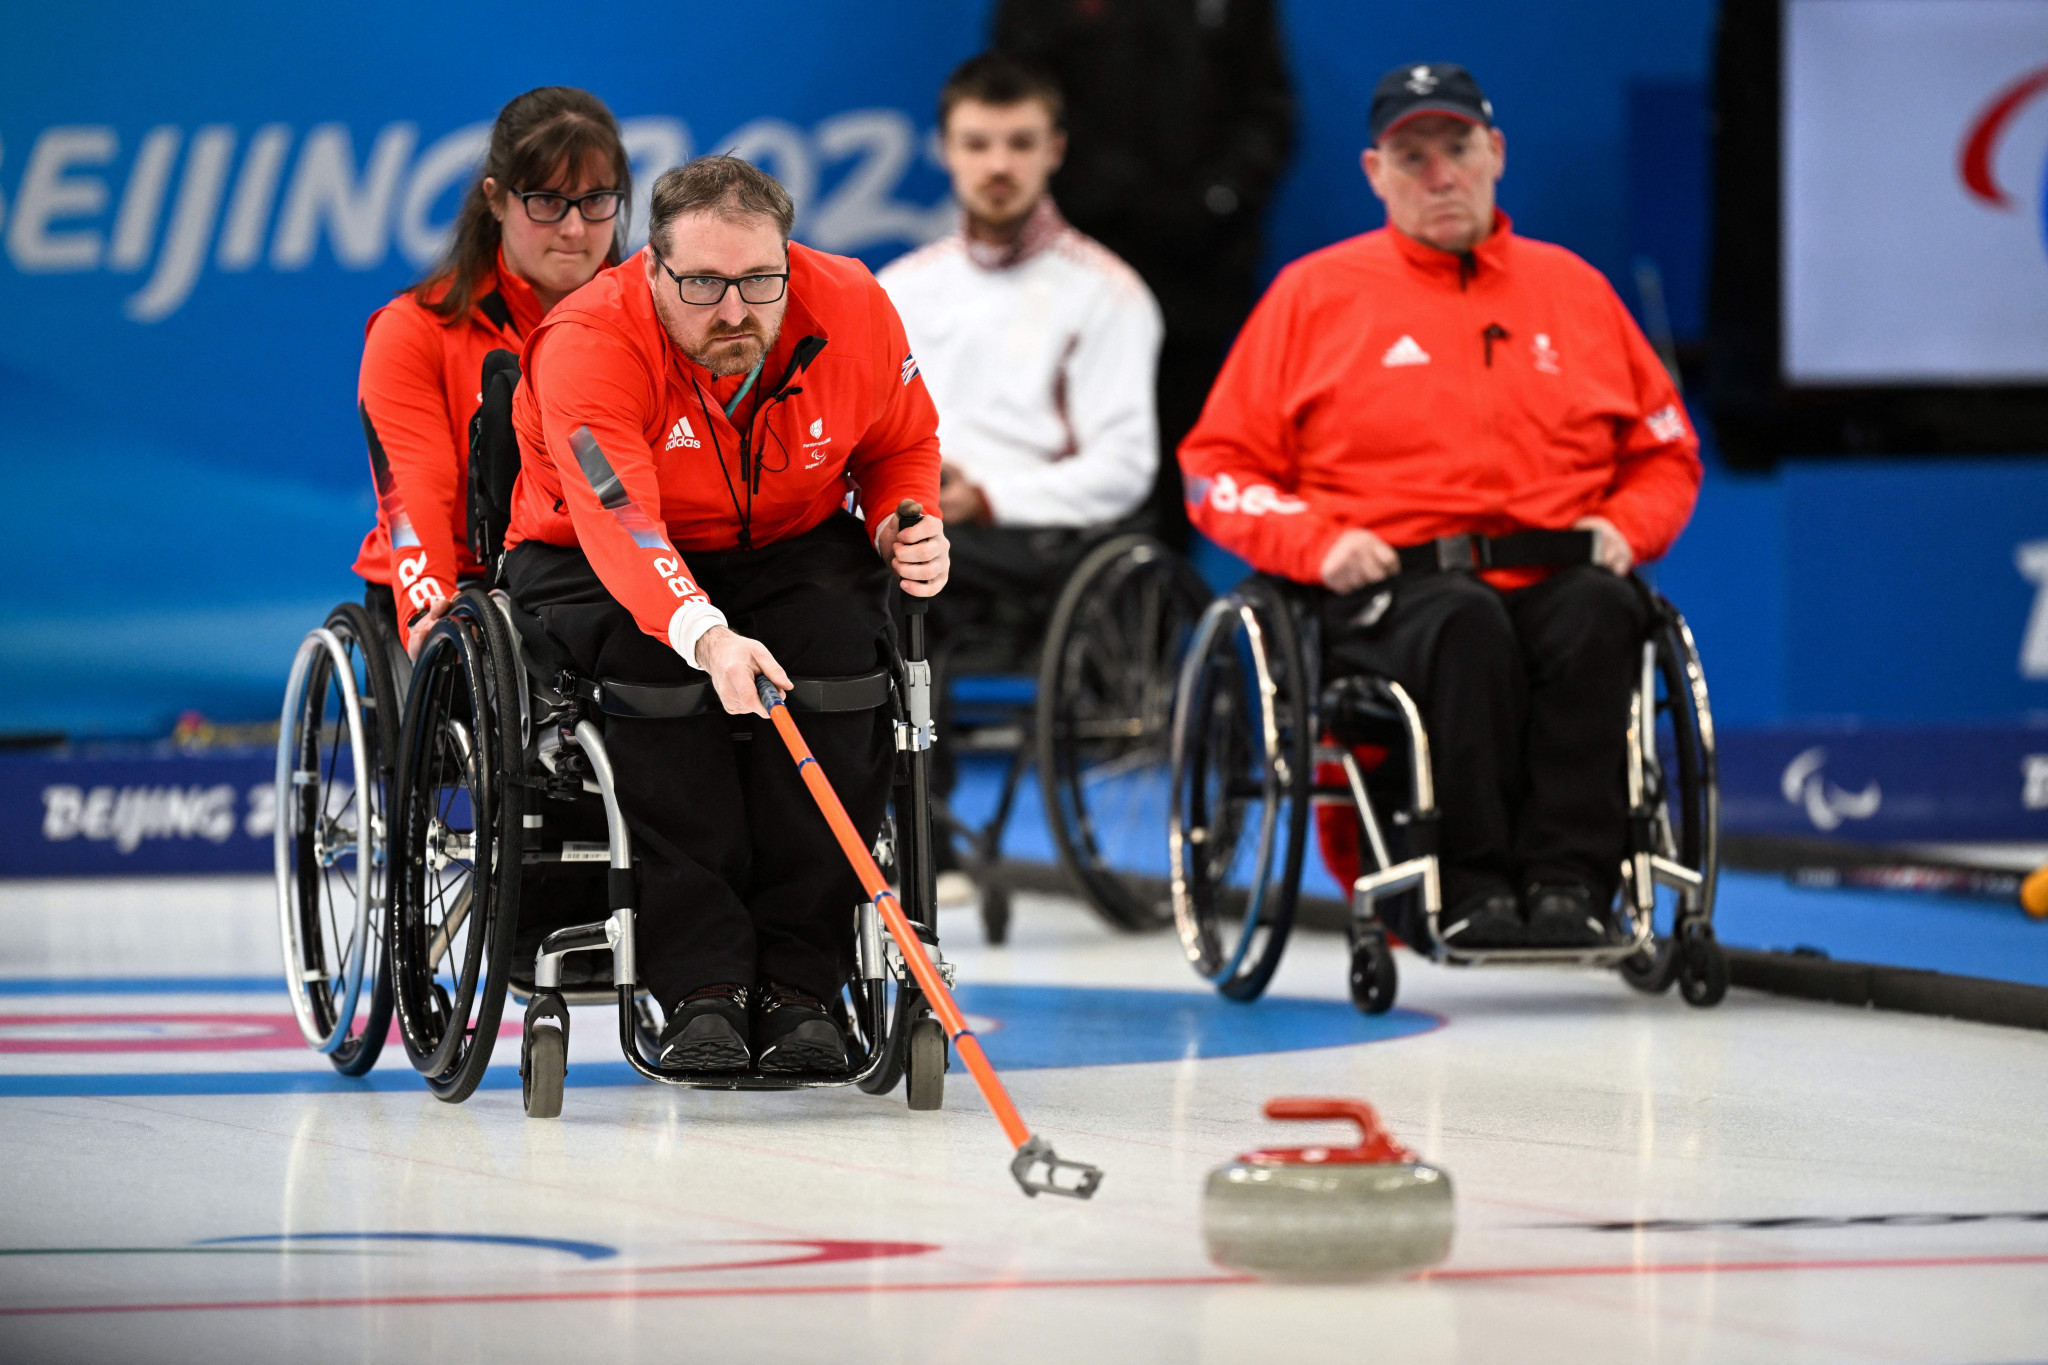 Britain finished their wheelchair curling tournament on a high after beating Latvia 8-4 ©Getty Images